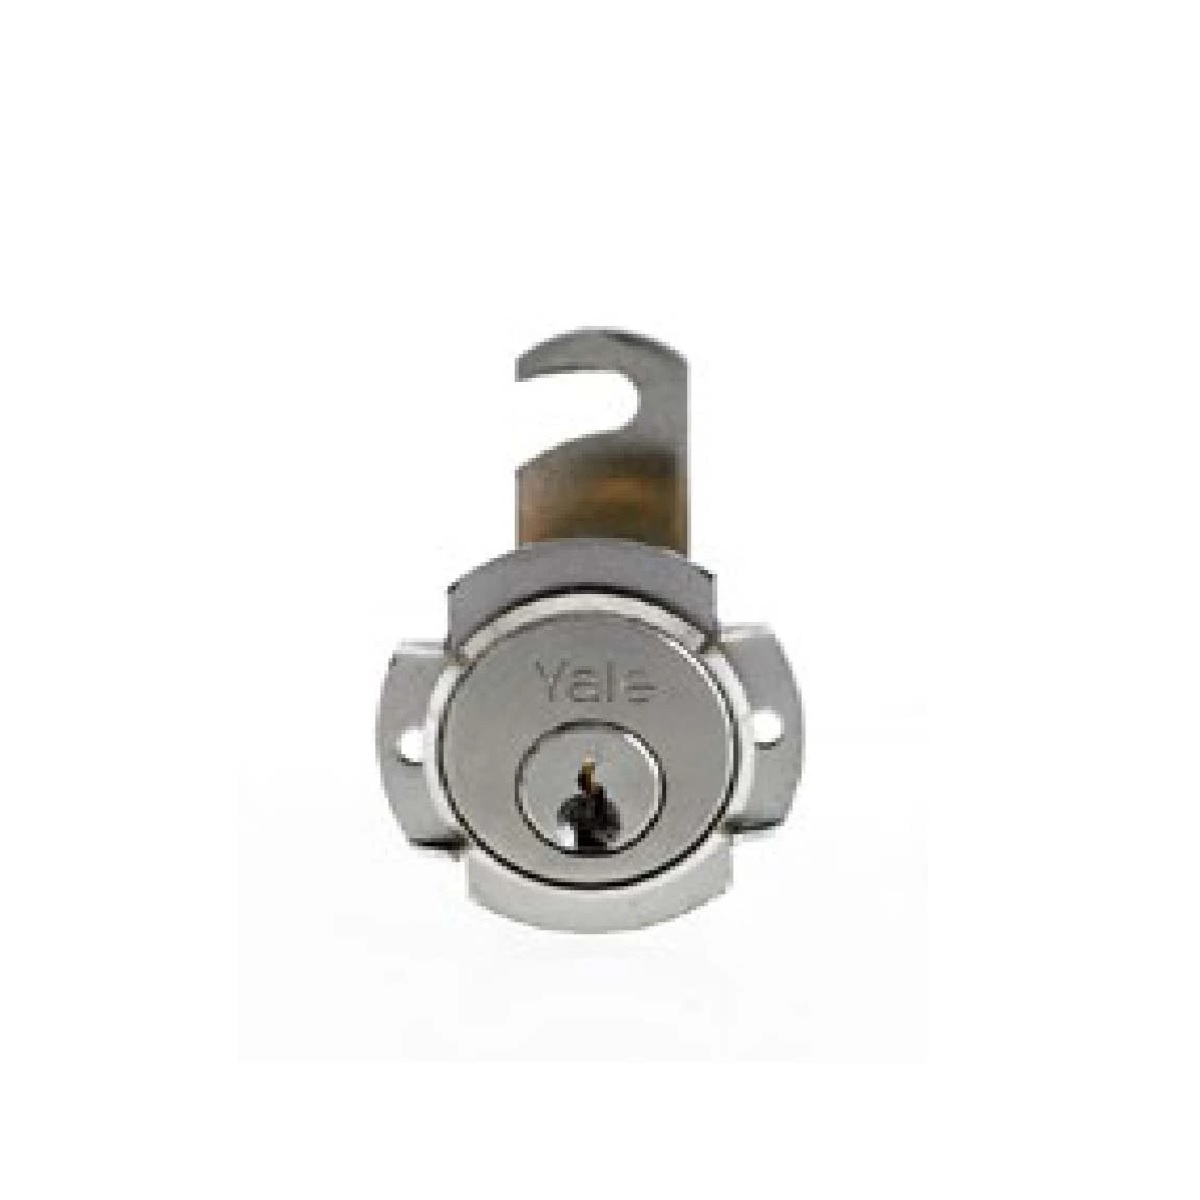 Yale 8900025 Cam Lock 25MM Comes With 2 Keys